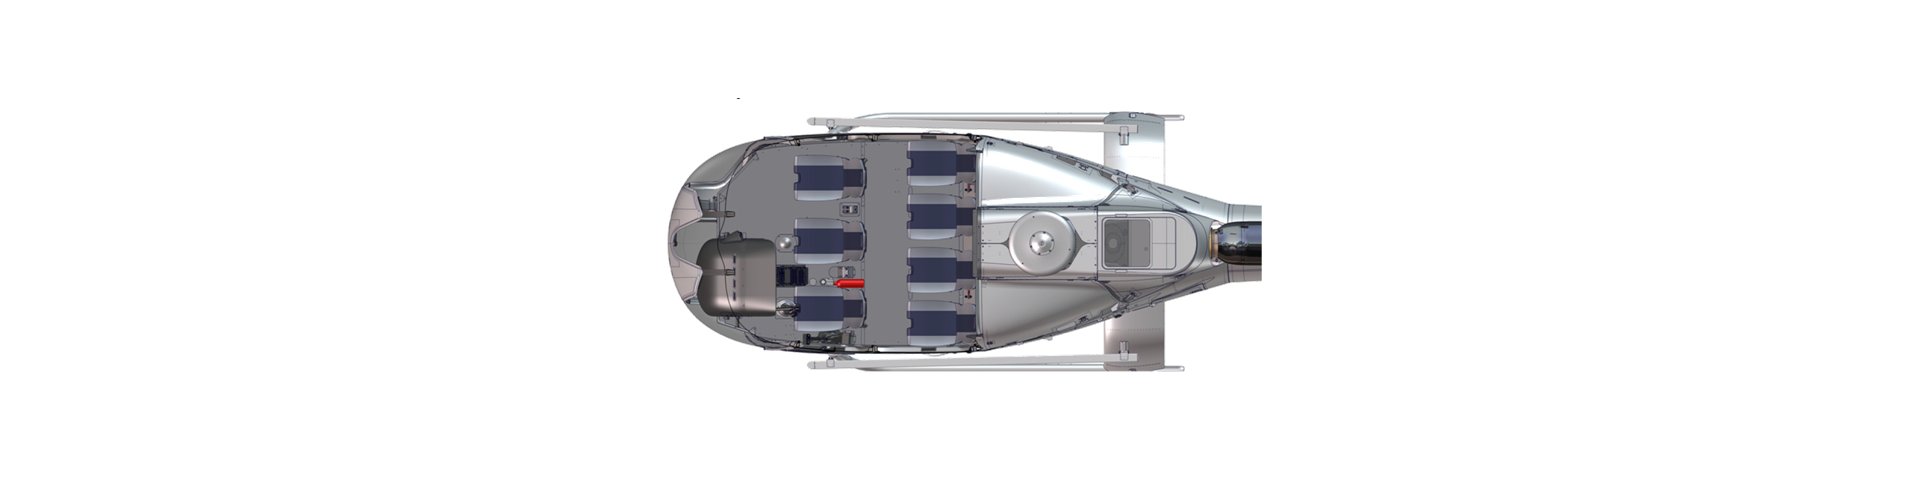 An Airbus H130 helicopter cabin configuration with six seats for passenger transport